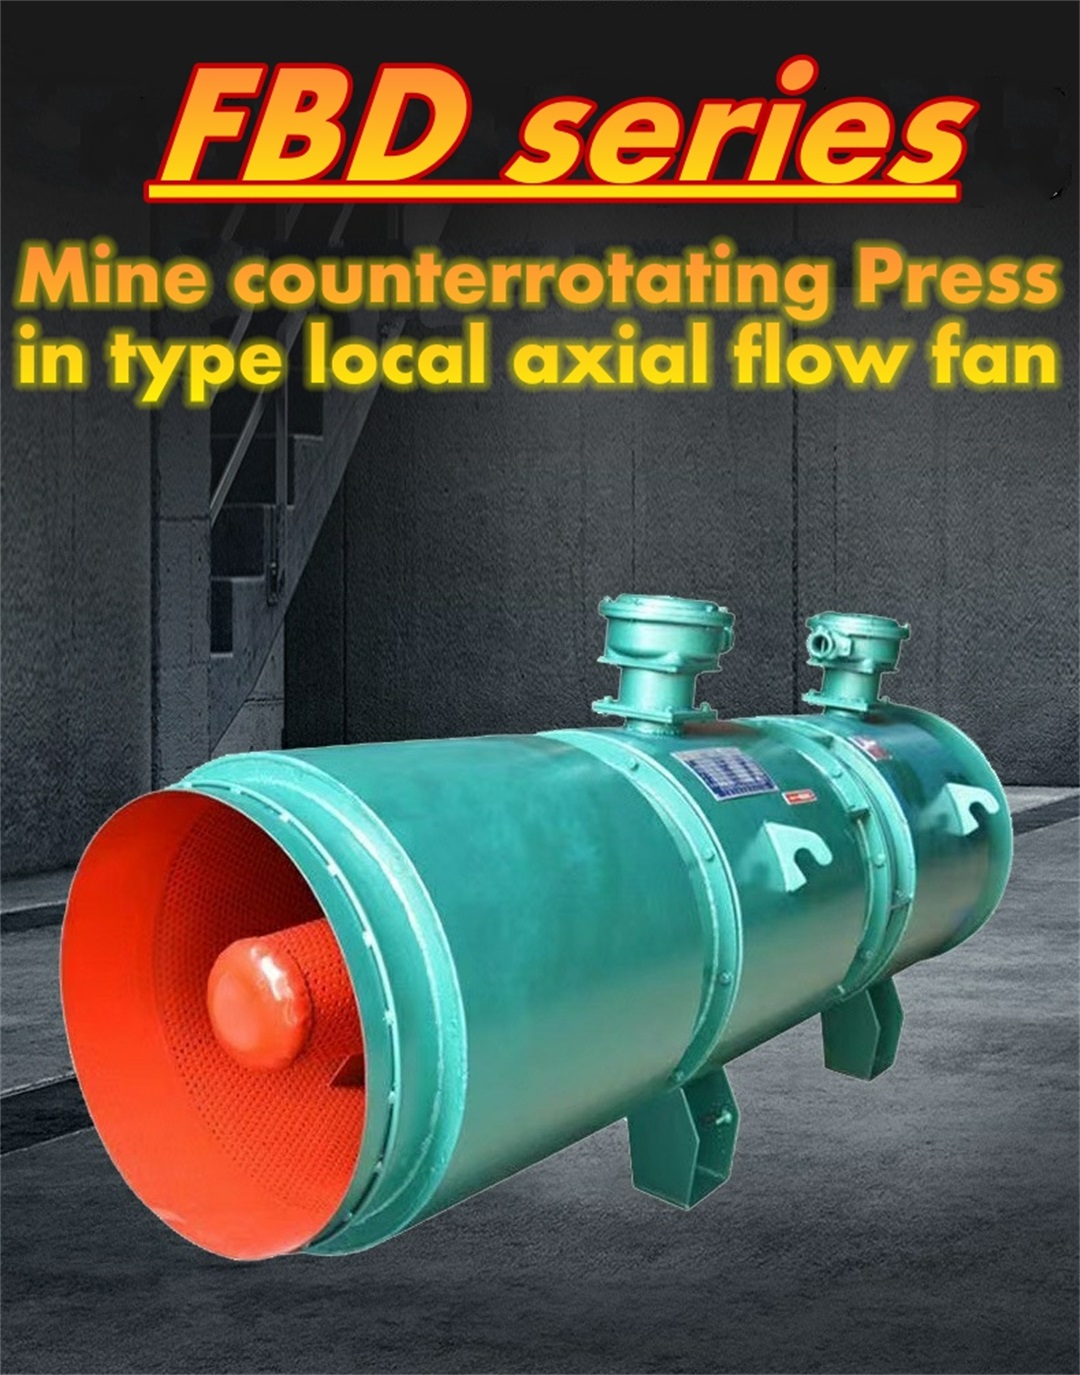 Mine counterrotating Press in type local axial flow fan